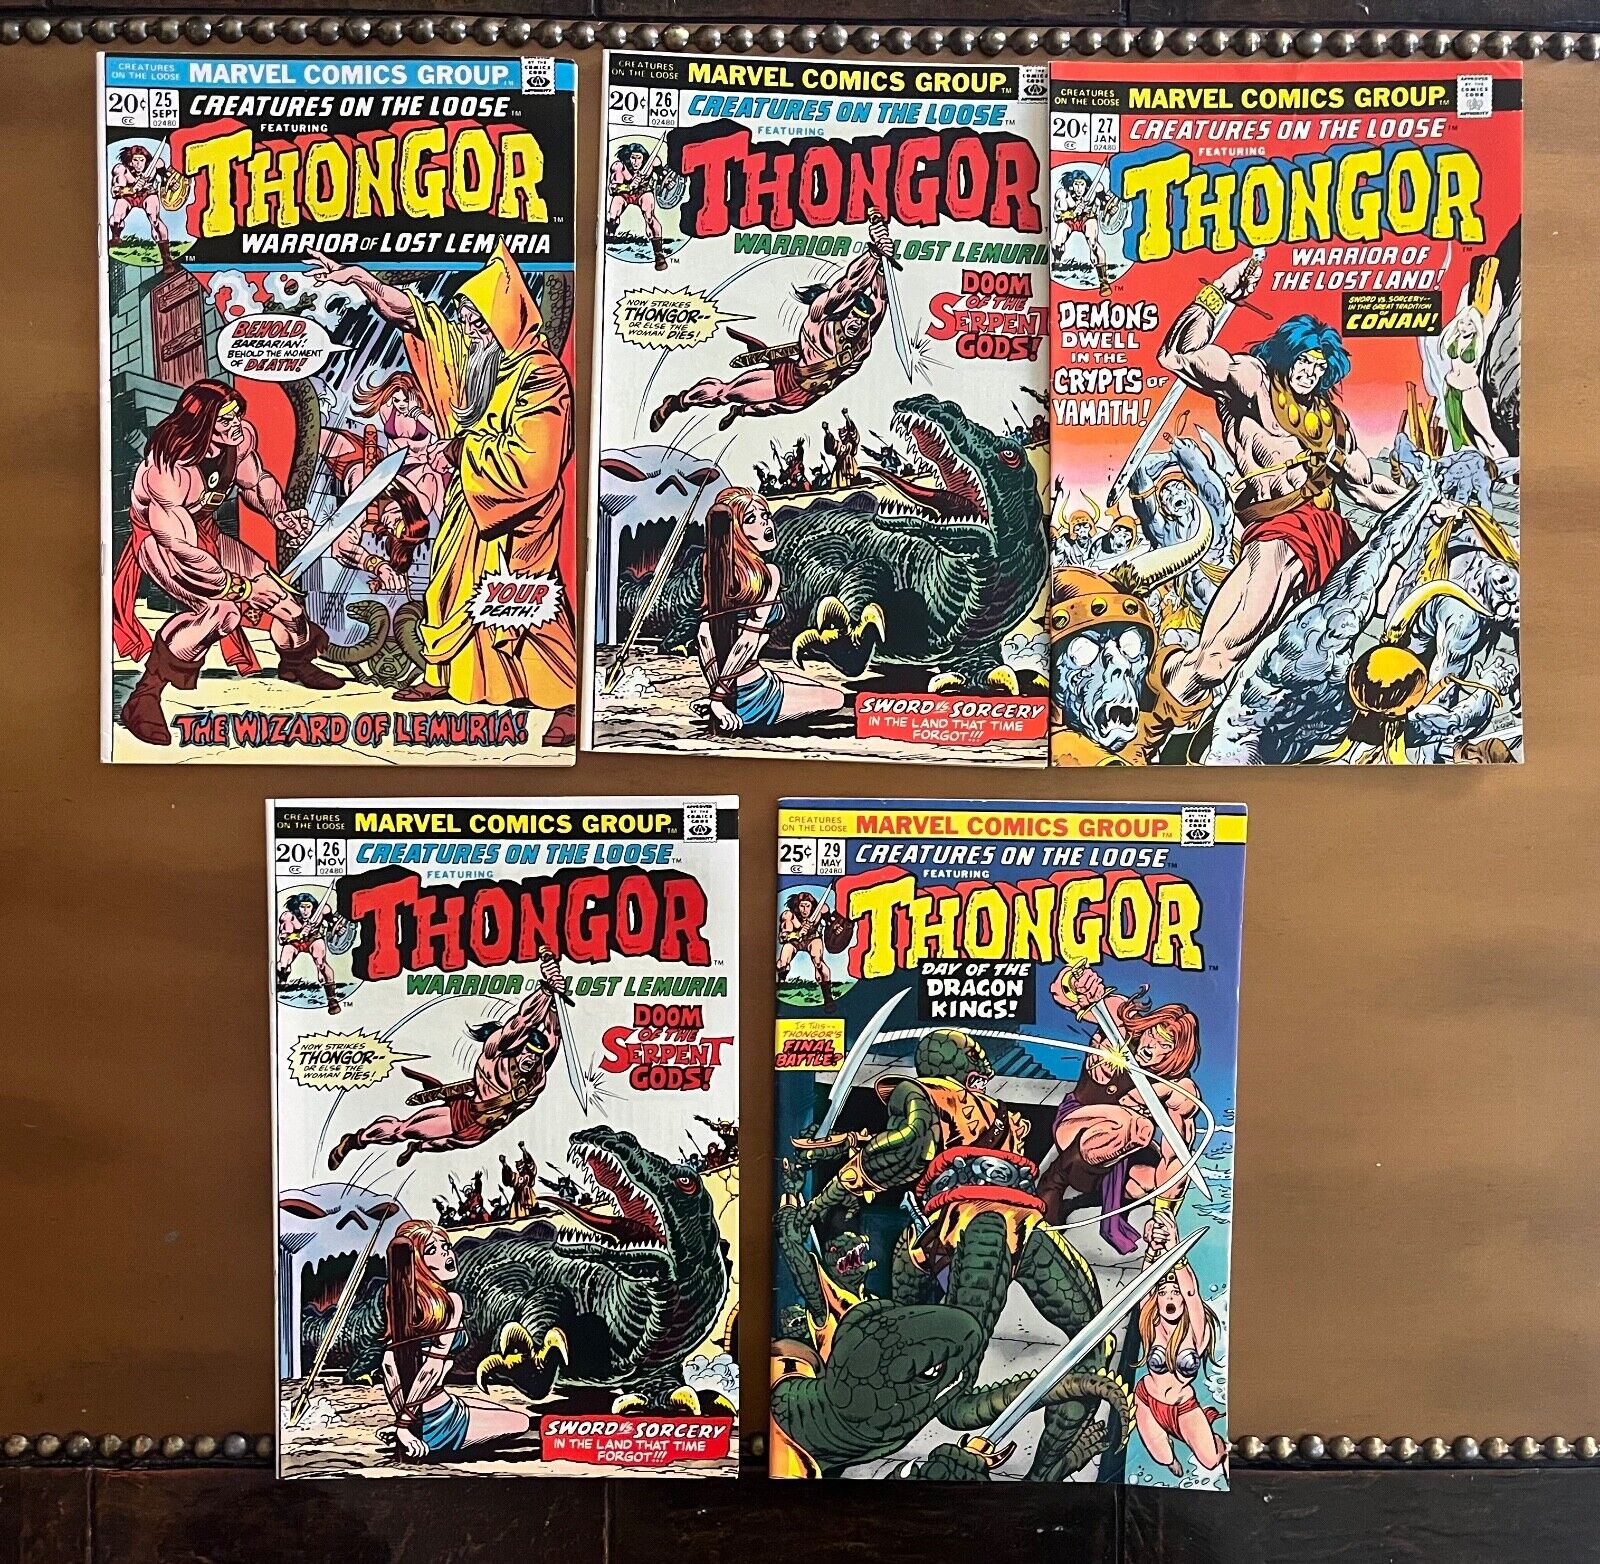 CREATURES ON THE LOOSE 25 26 26 27 29 - BRONZE AGE LOT - Marvel Thongor